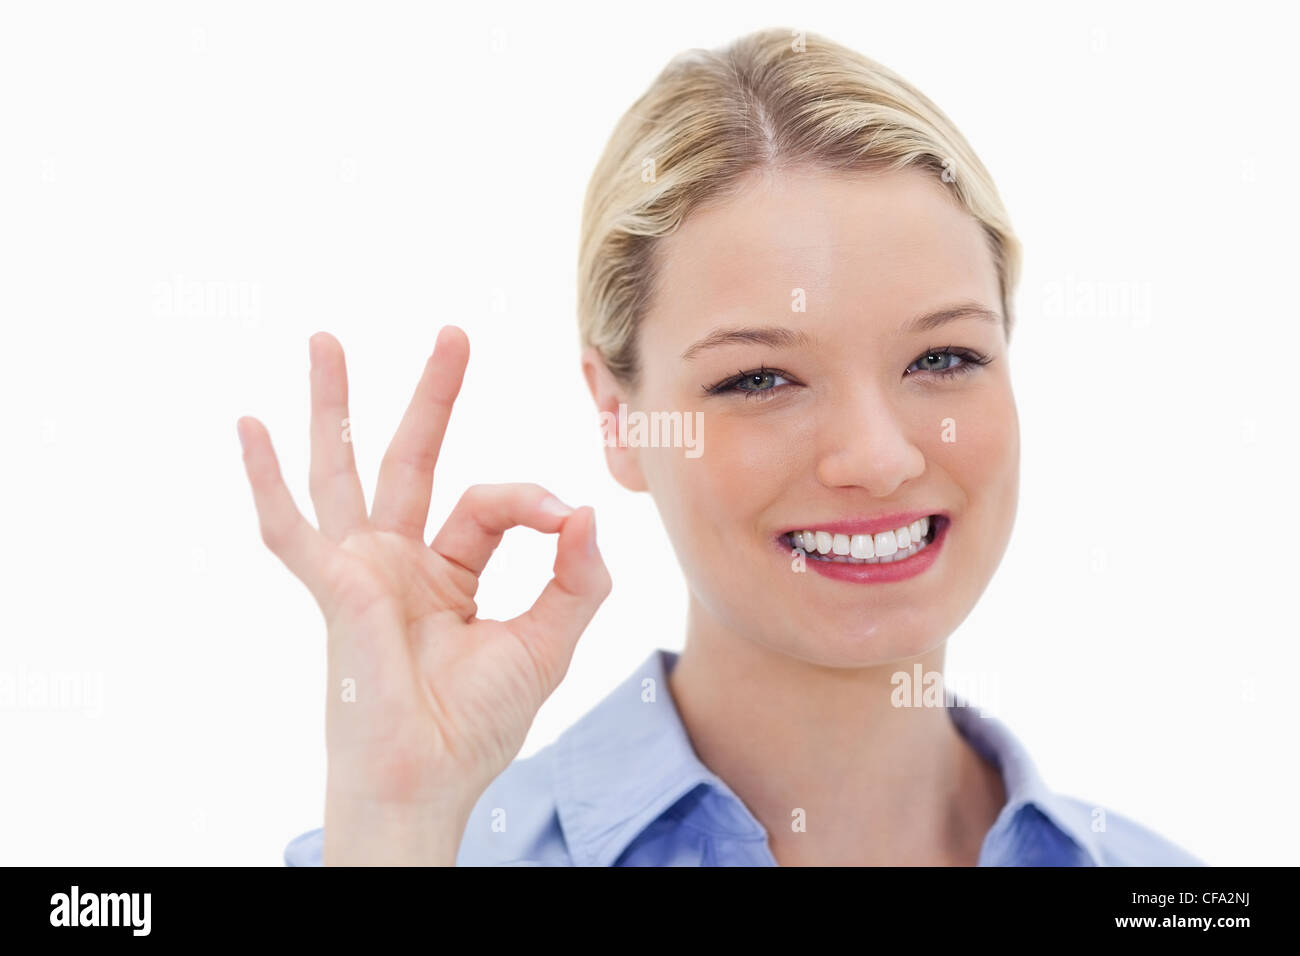 Smiling woman approves Stock Photo